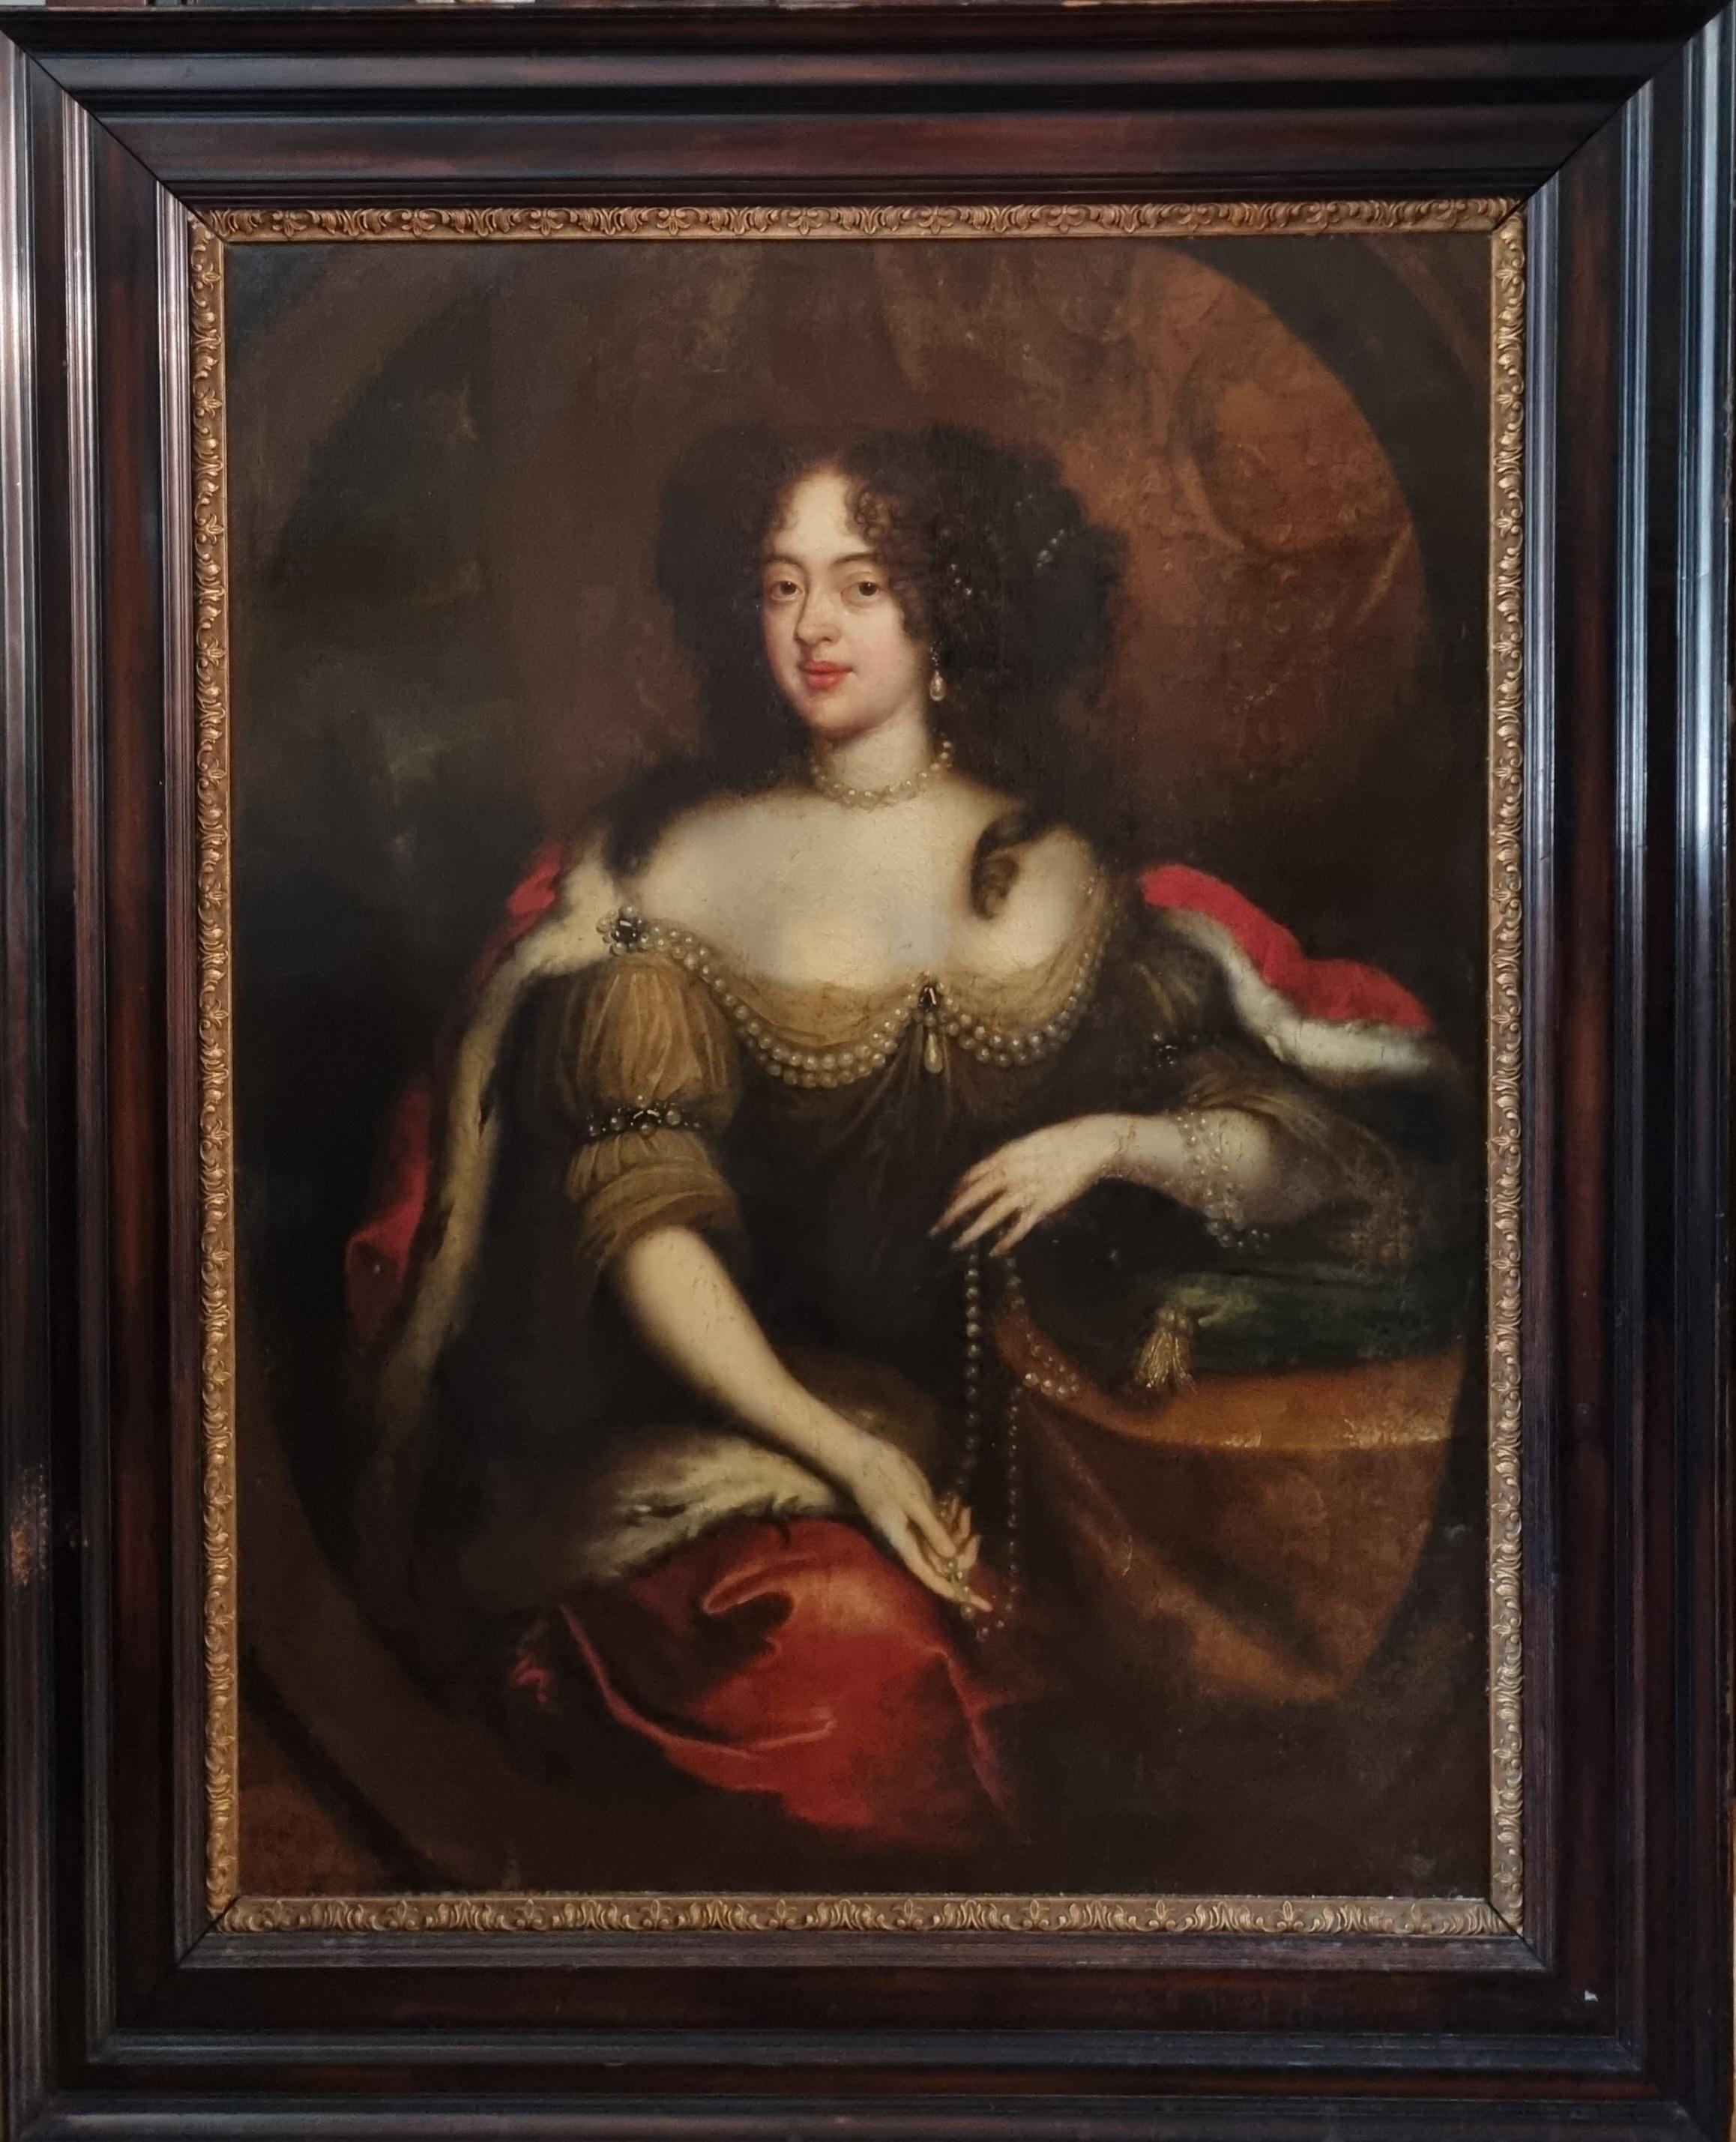 Unknown Portrait Painting - 17th Century Oil Painting on Canvas Portrait Catherine of Braganza Queen Consort